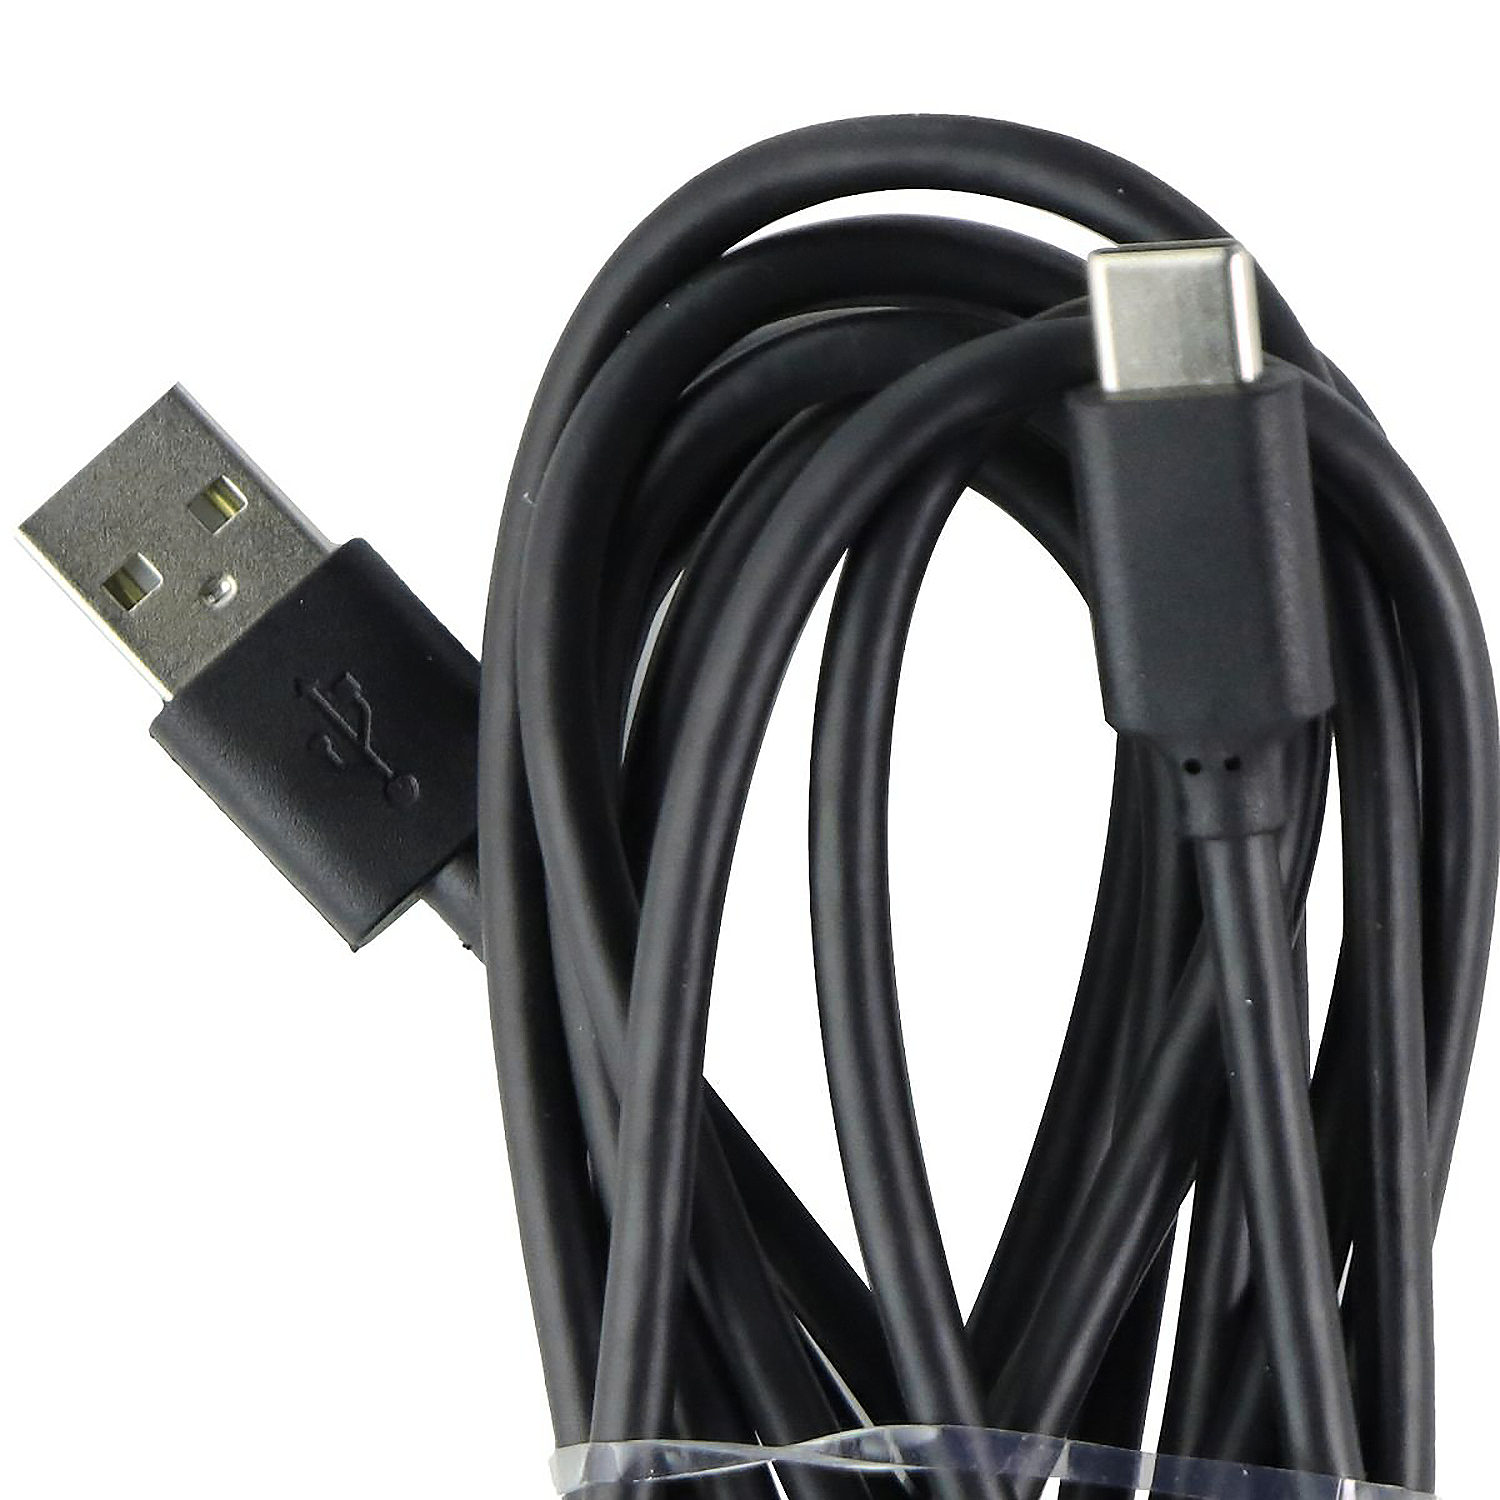 KEY USB-A to USB-C Type C Charging Sync Data Cable 10ft Samsung Google HTC LG